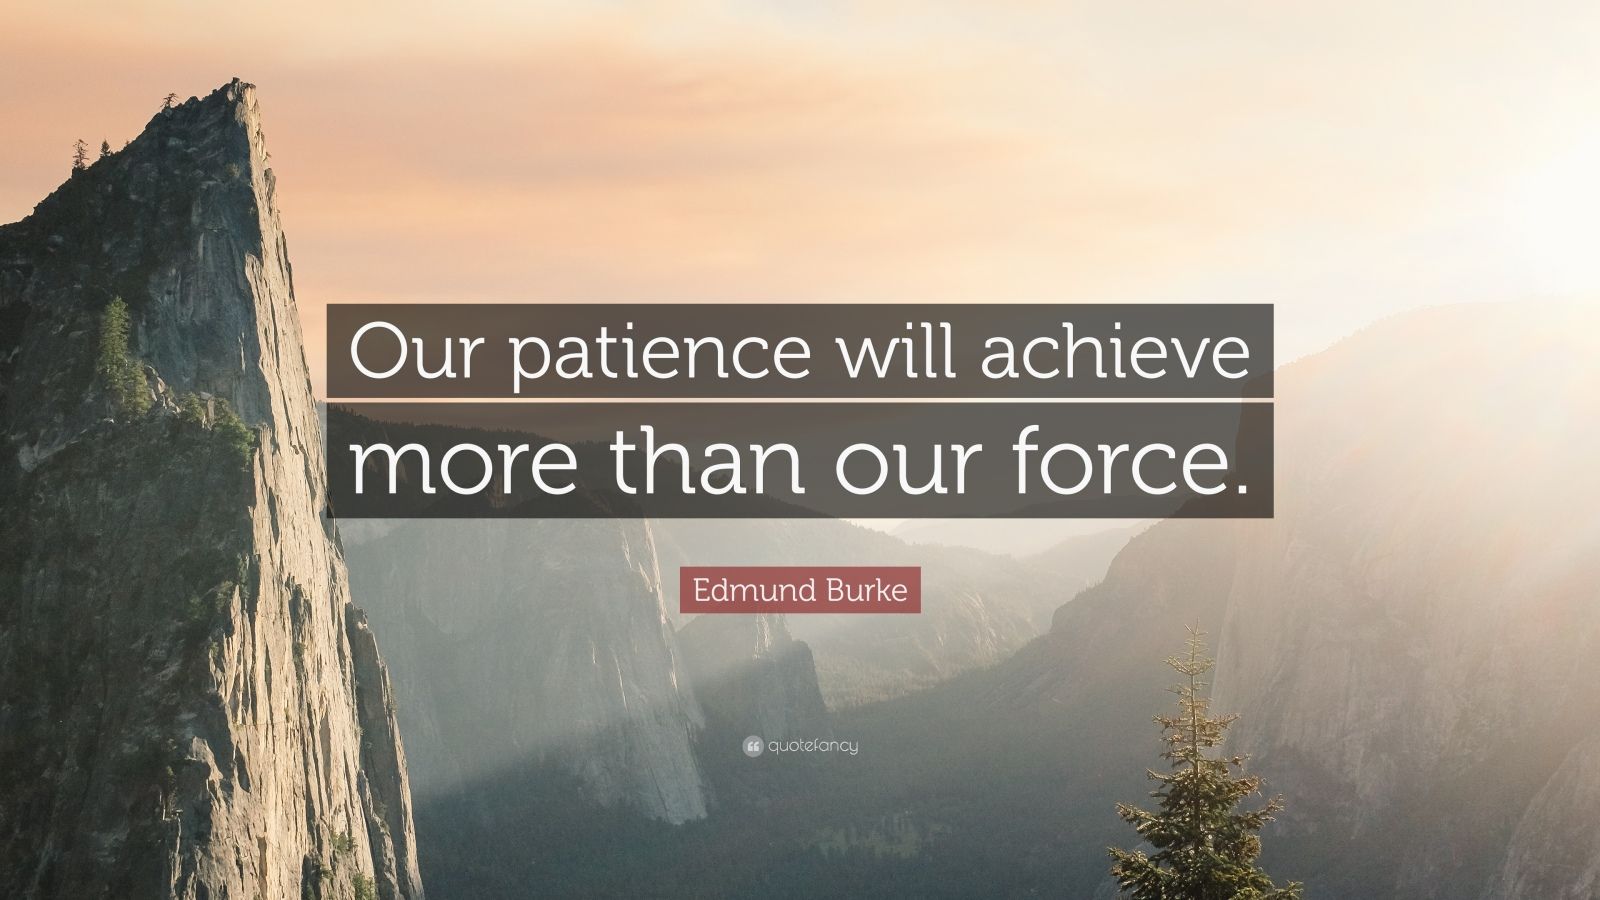 Edmund Burke Quote: “Our patience will achieve more than our force.”